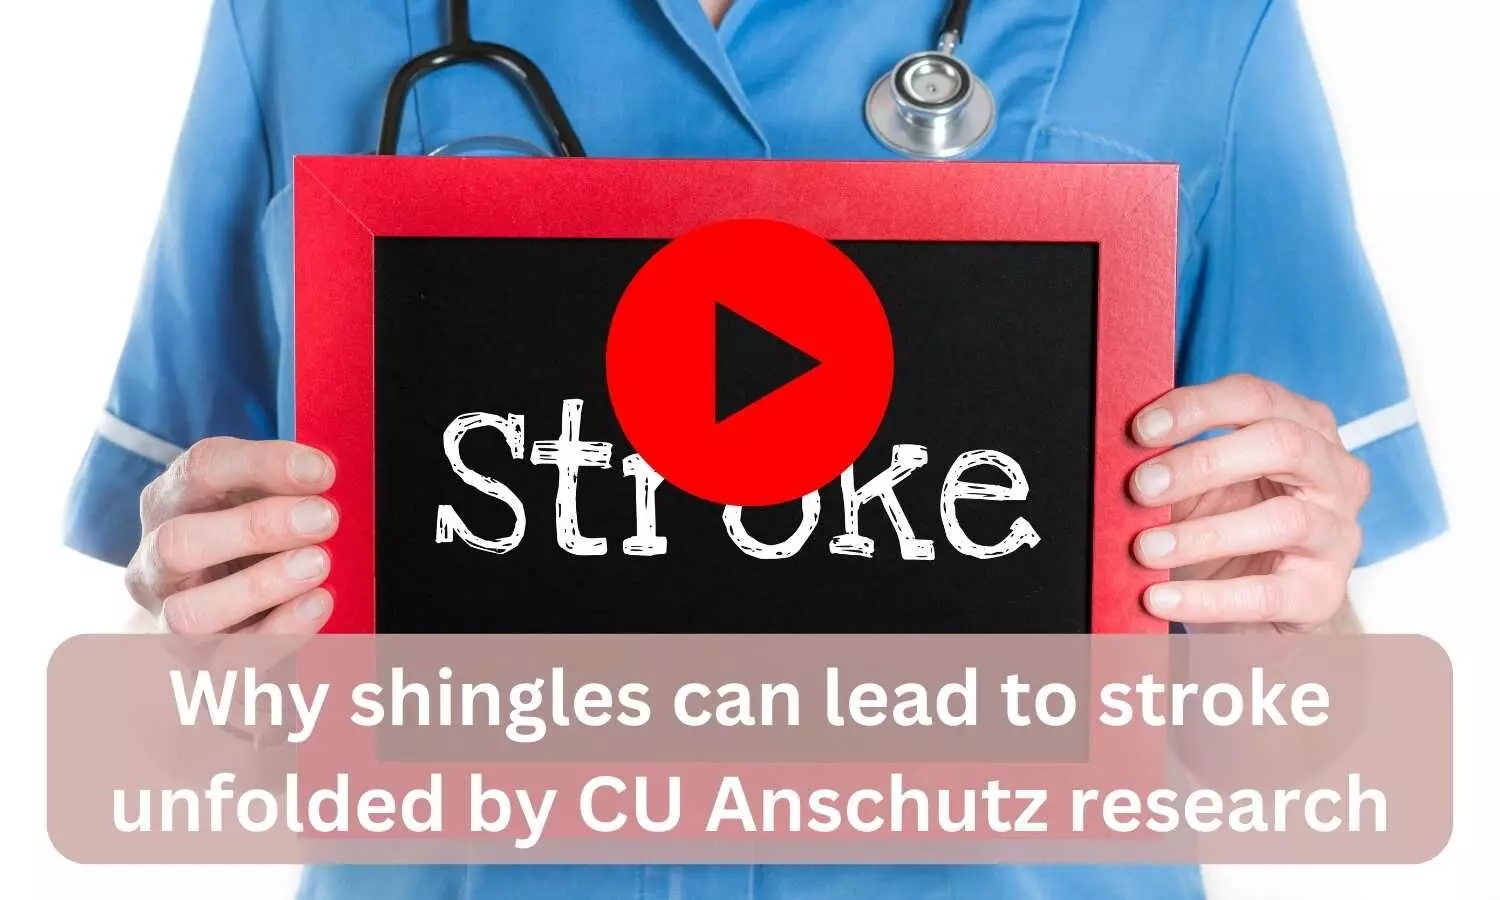 Why shingles can lead to stroke unfolded by CU Anschutz research